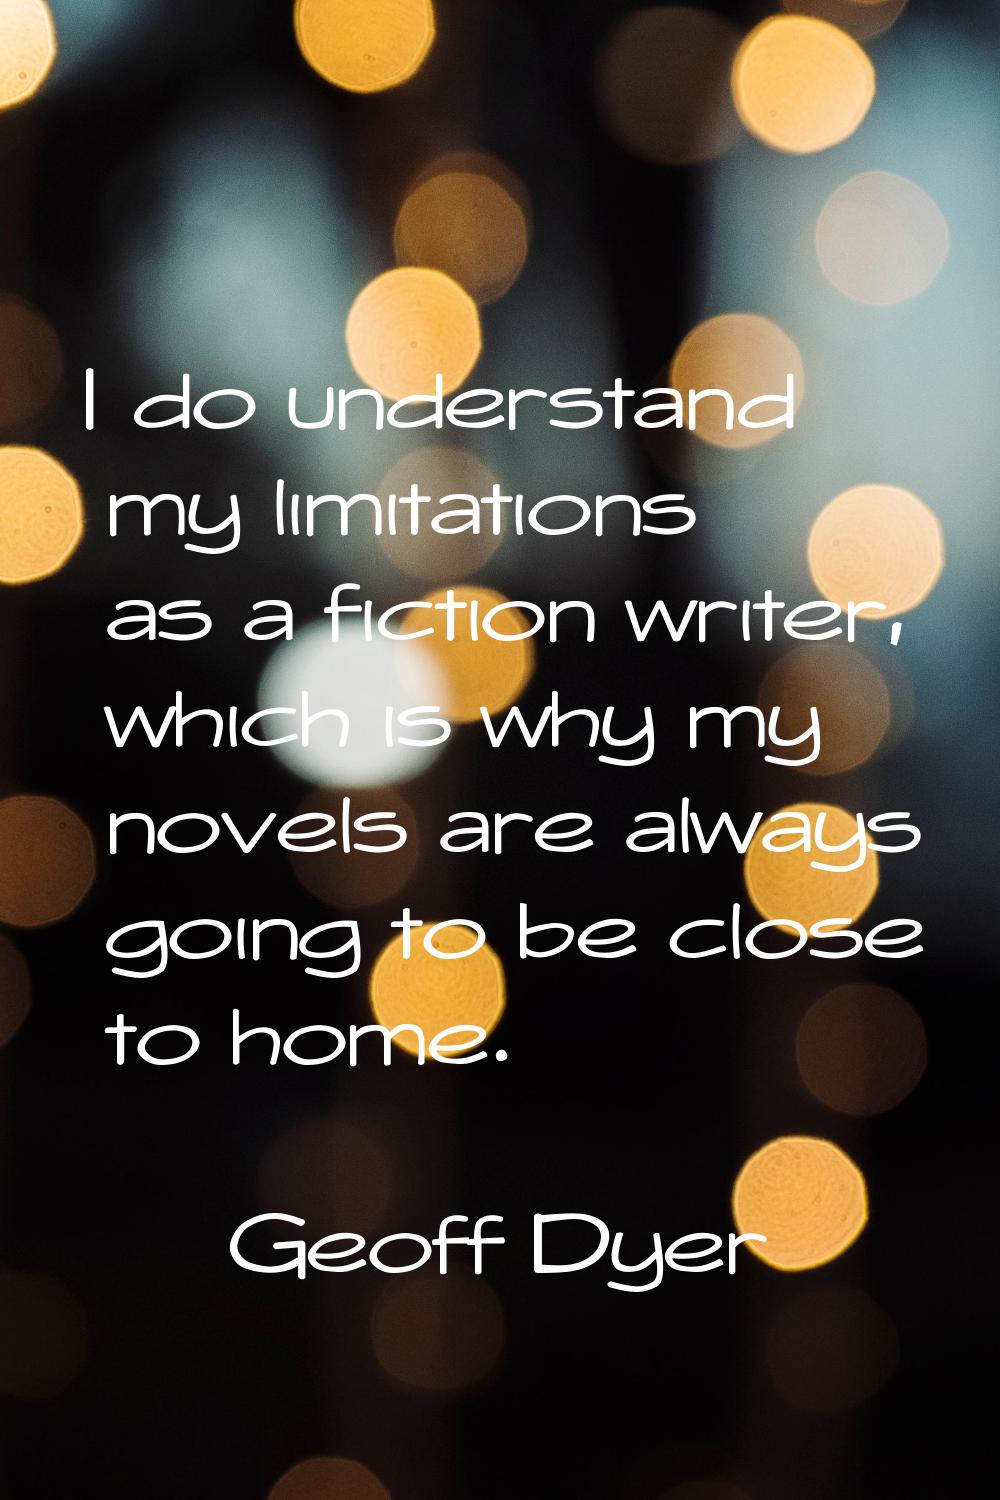 I do understand my limitations as a fiction writer, which is why my novels are always going to be c